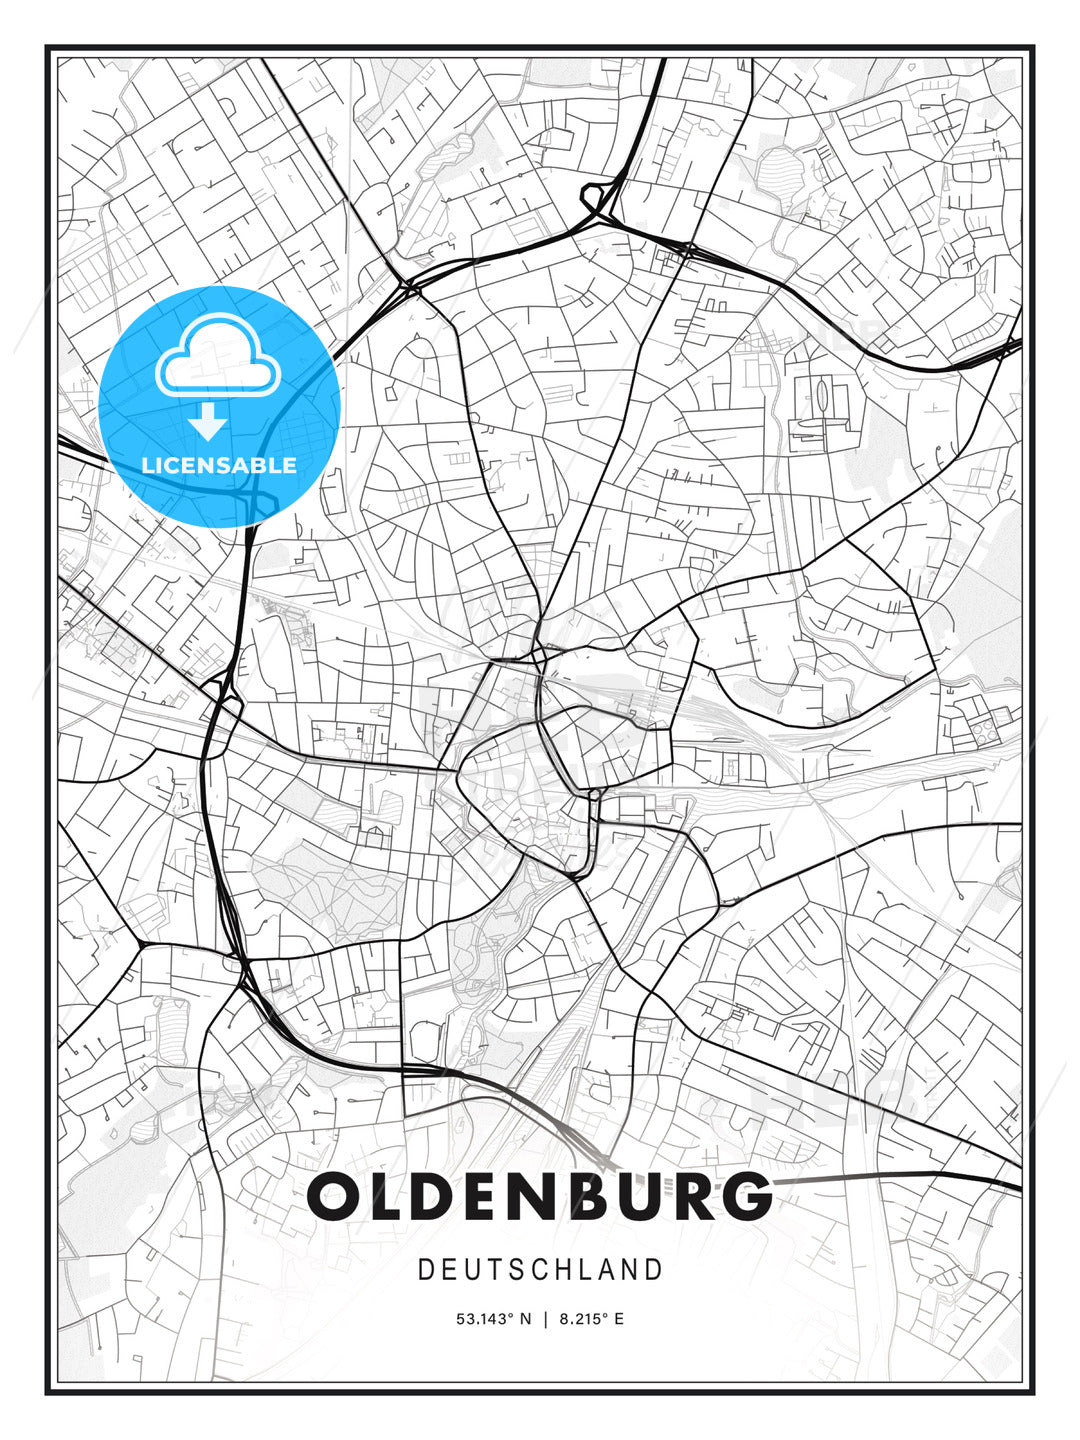 Oldenburg, Germany, Modern Print Template in Various Formats - HEBSTREITS Sketches